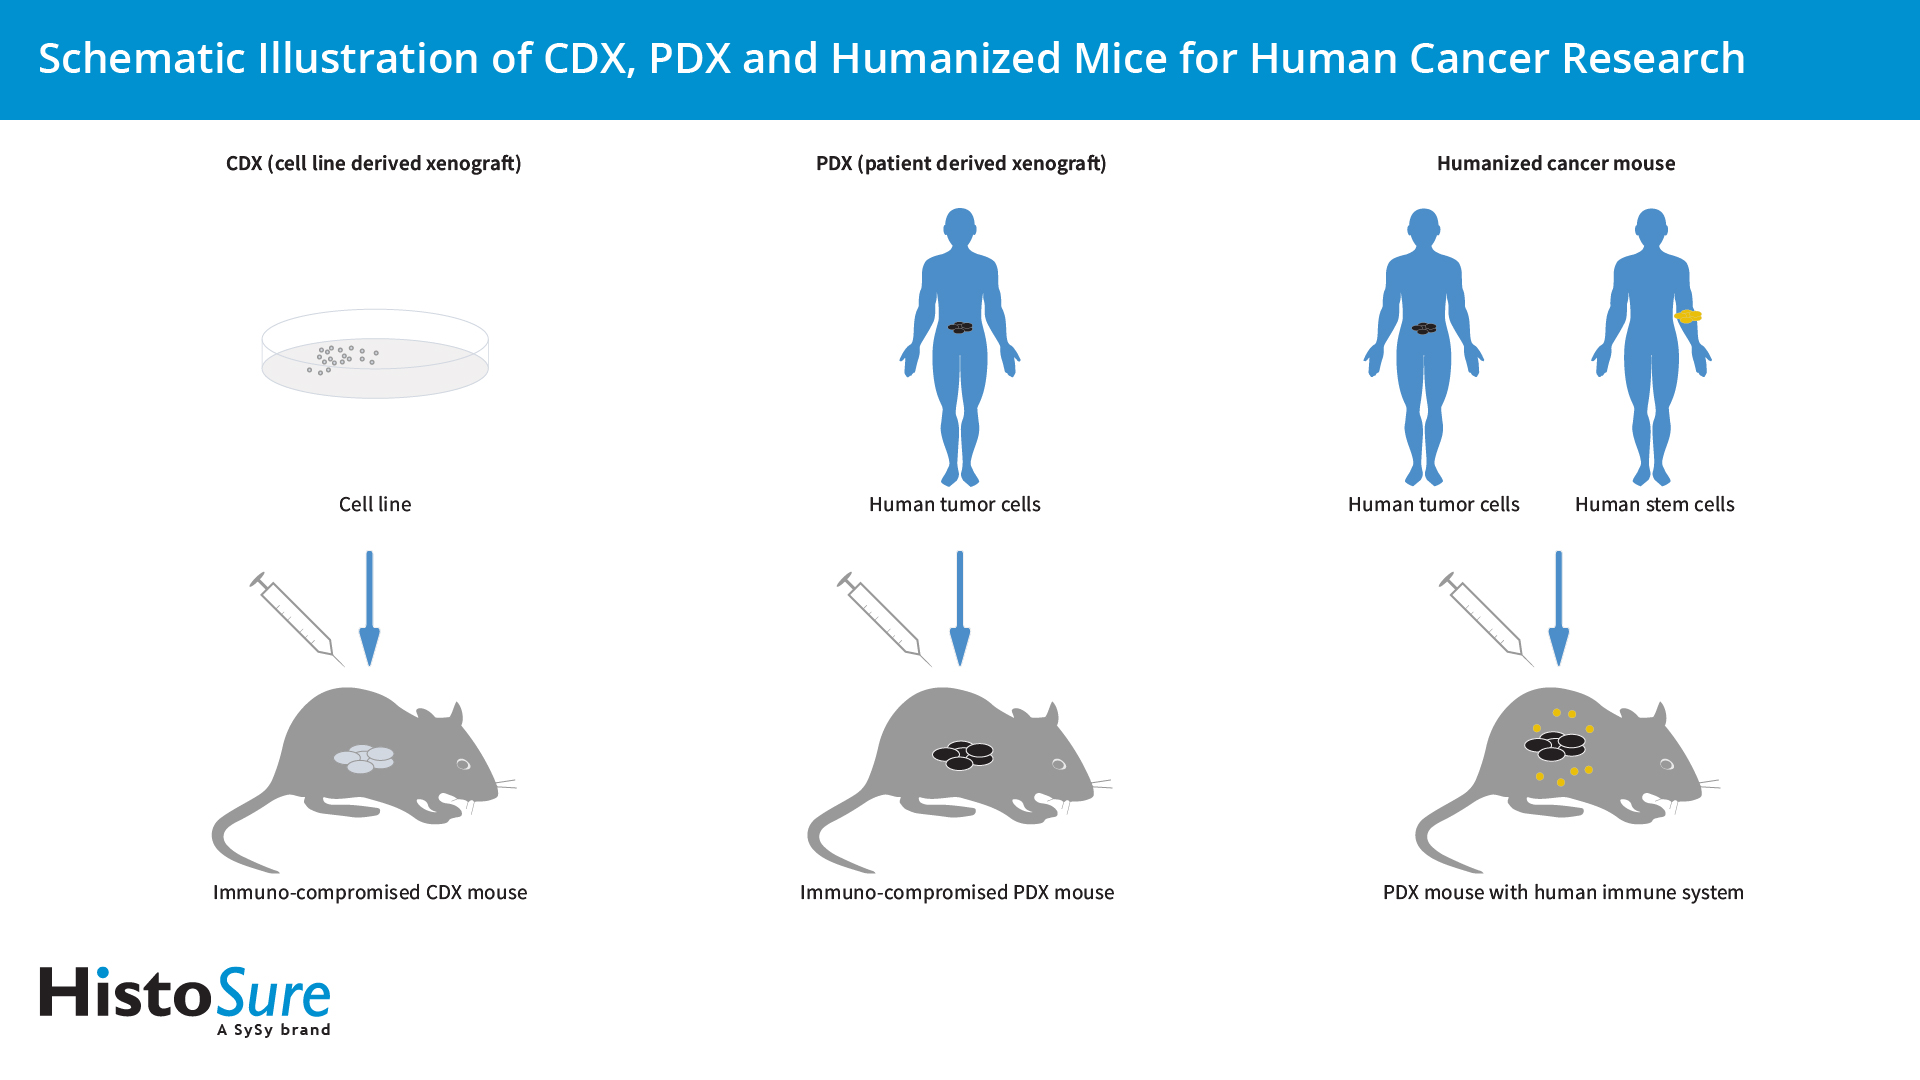 Schematic illustration of CDX, PDX and humanized mice for human cancer research